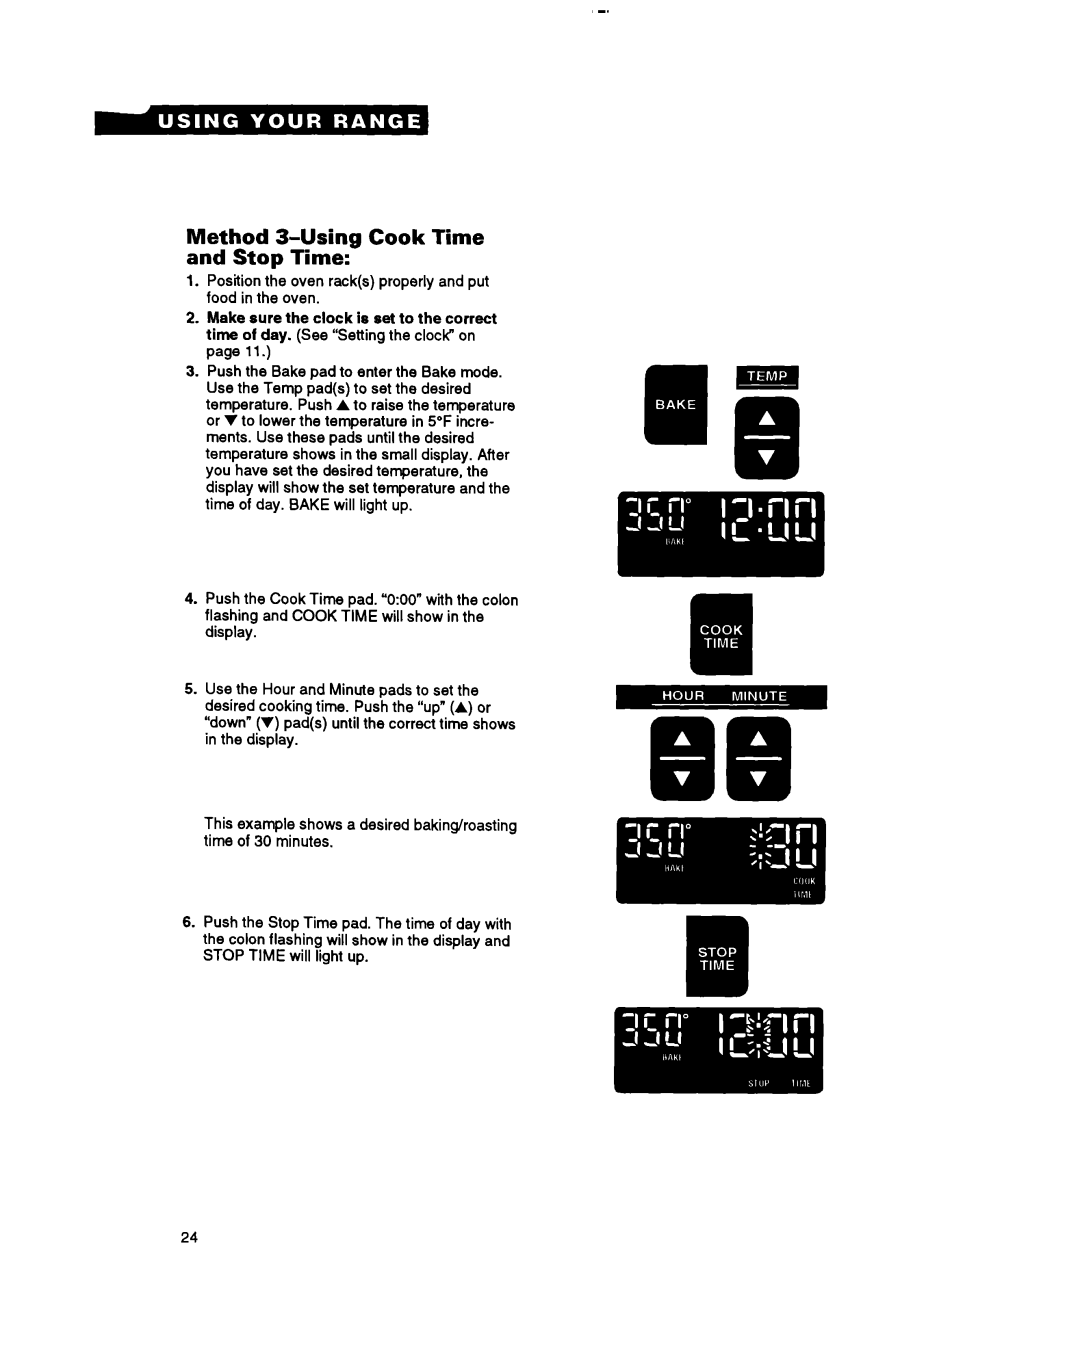 Whirlpool RF385PXY manual Method 3-UsingCook Time and Stop Time 